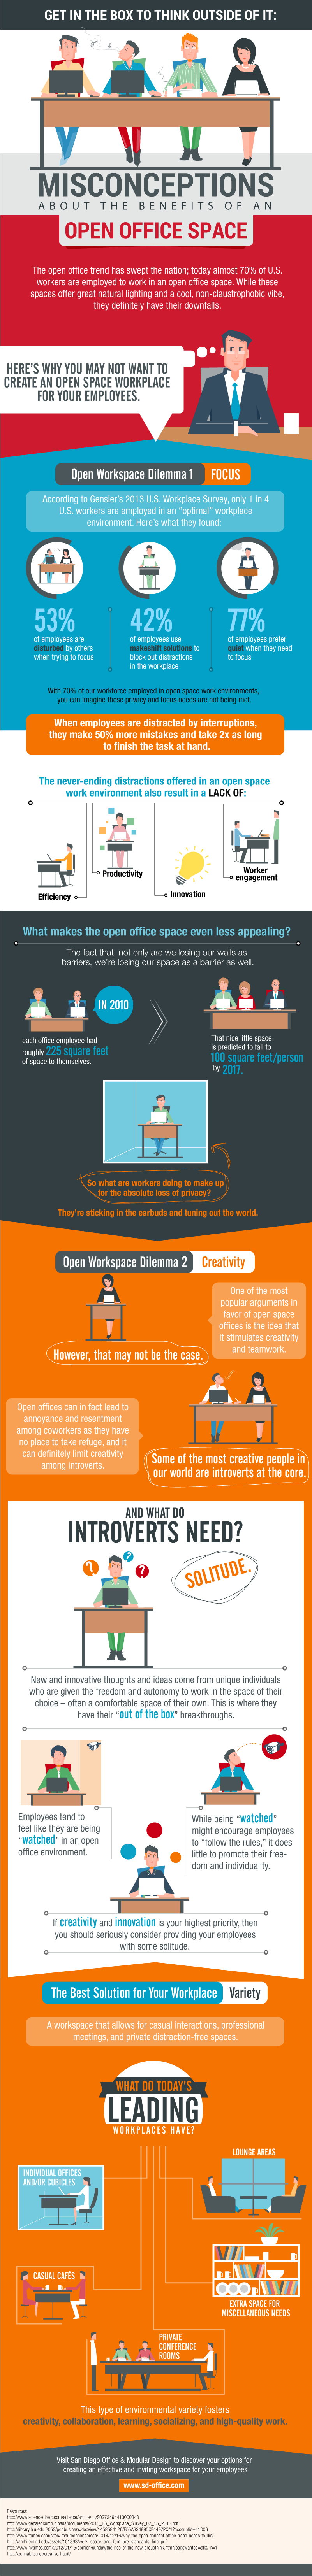 Misconceptions About the Benefits of an Open Office Space